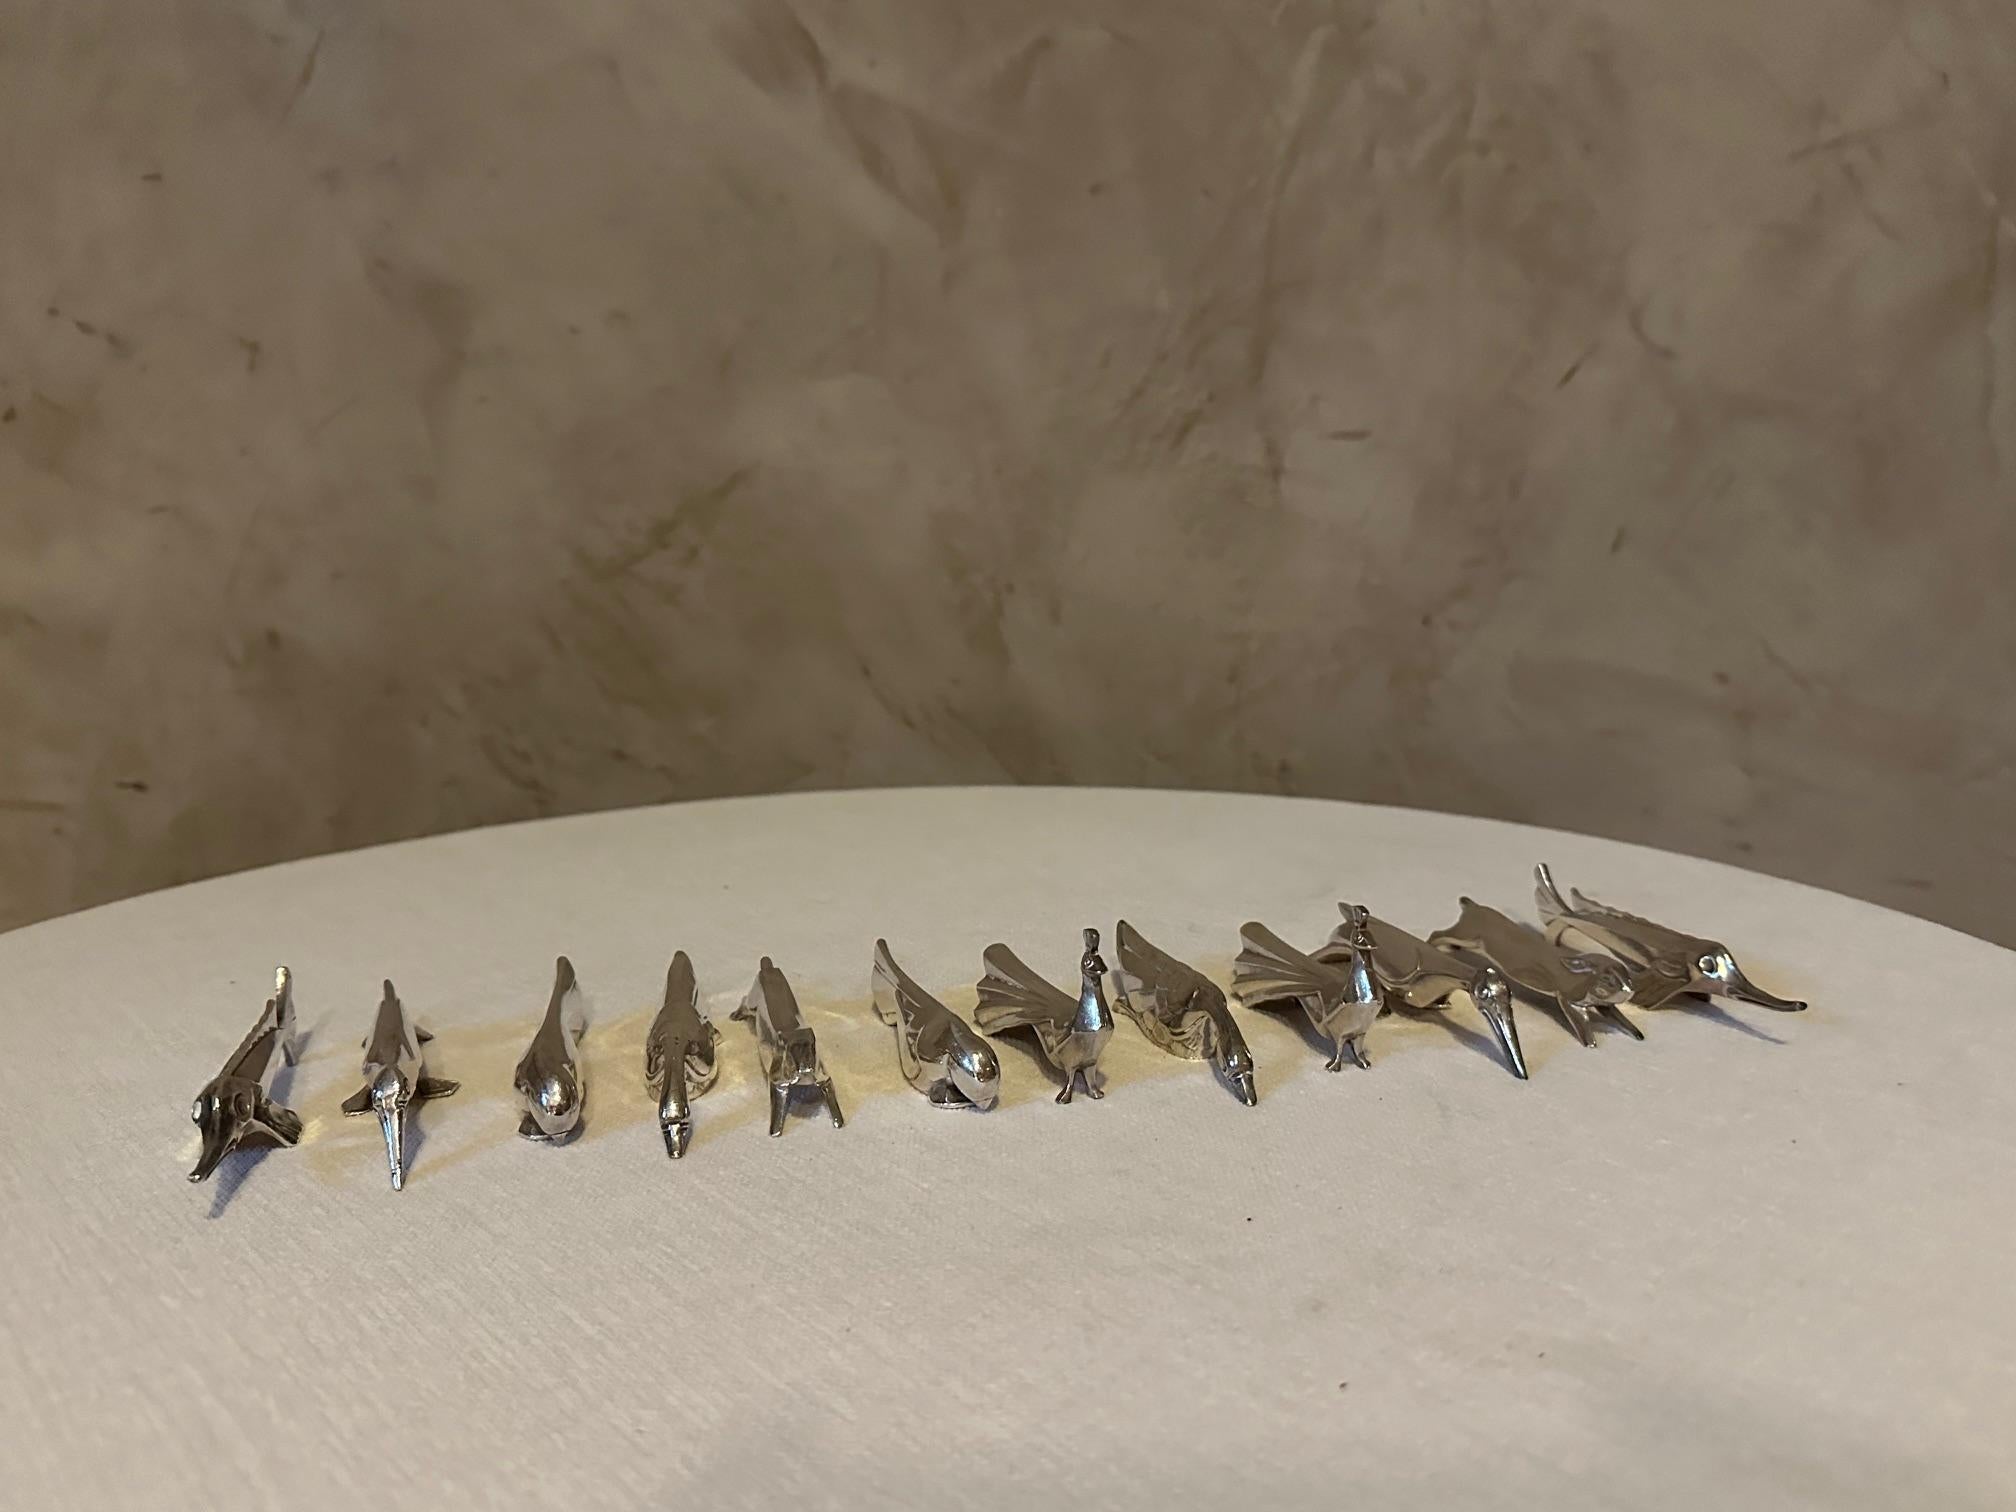 Very nice set of 12 art deco knife holders in silver metal. 
This charming knife holder set was designed by Swiss artist Edouard Sandoz for Christofle. 
Each knife holder is silver plated and represents a different animal, from a hare to a peacock.